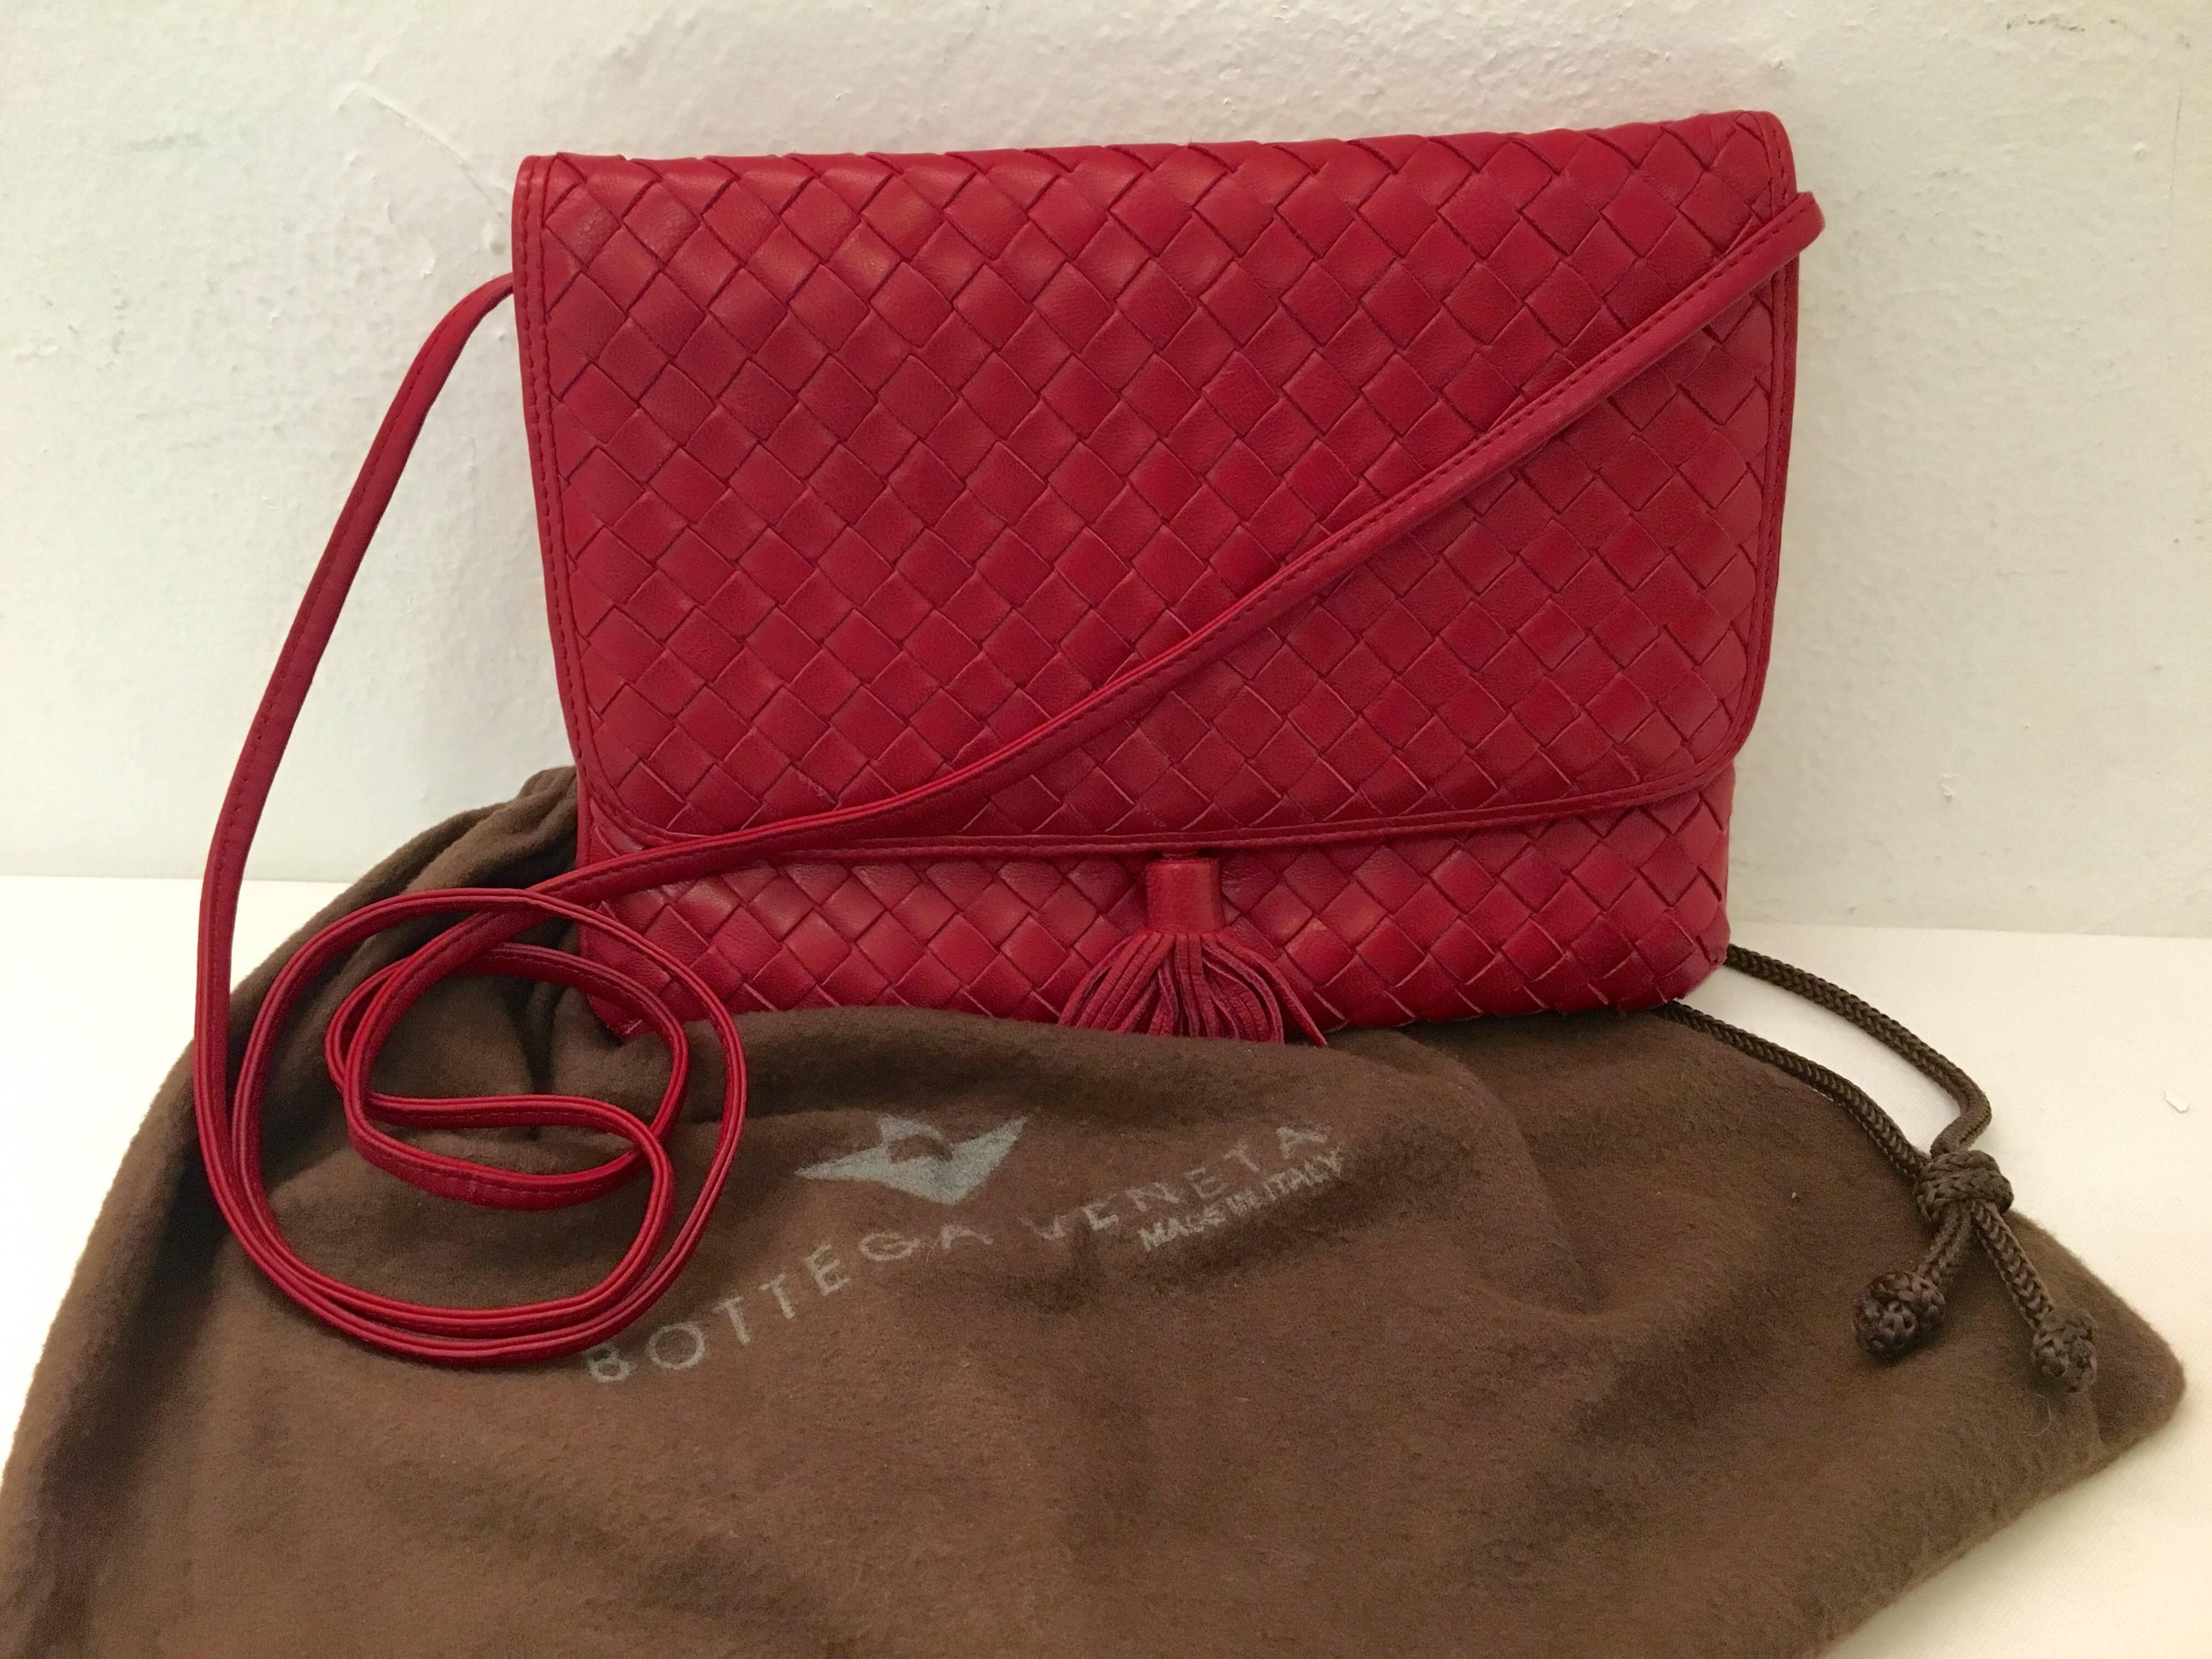 Instantly recognizable as Bottega Veneta!  Created using signature intrecciato craftsmanship, this deep red bag envelope bag is a multitasking gem!  Use as a crossbody style or tuck the strap into the bag and carry as a delightful clutch.  The